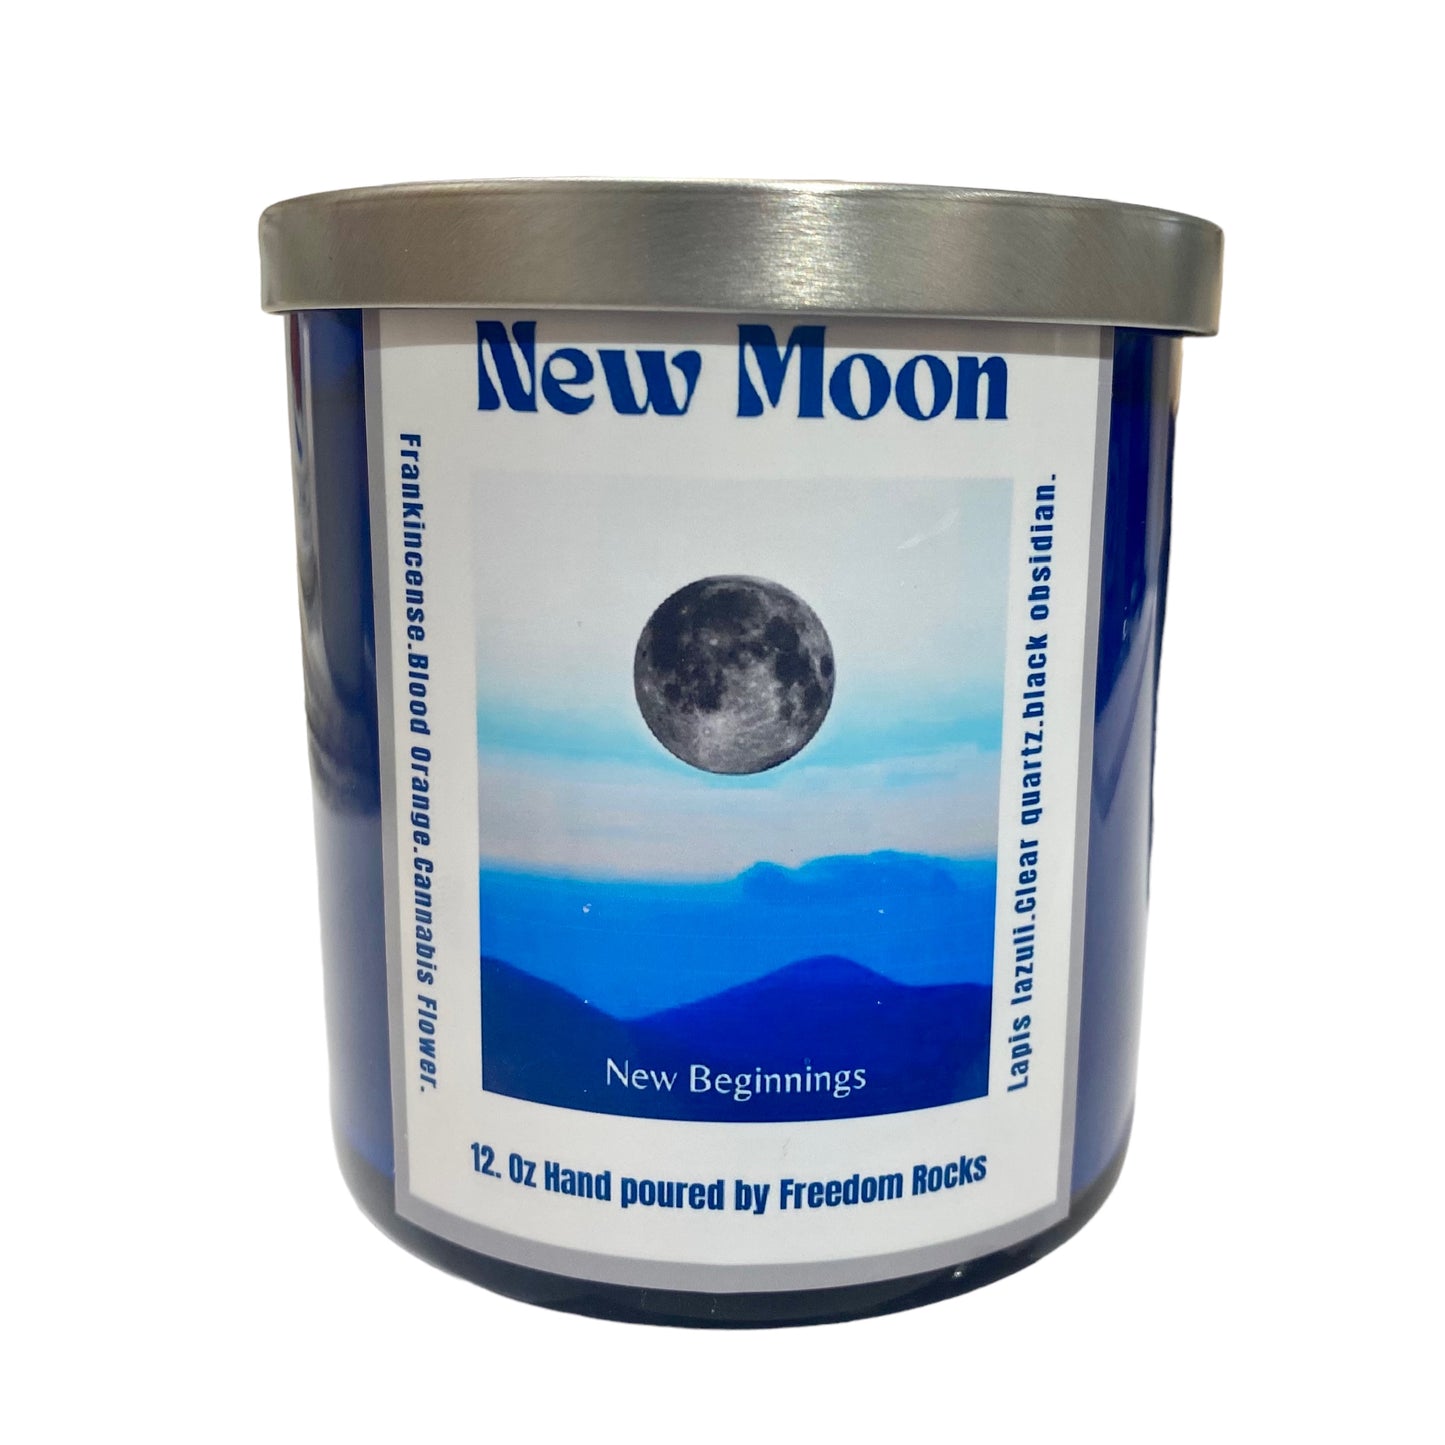 New Moon 10 oz Hand Poured Soy Candle